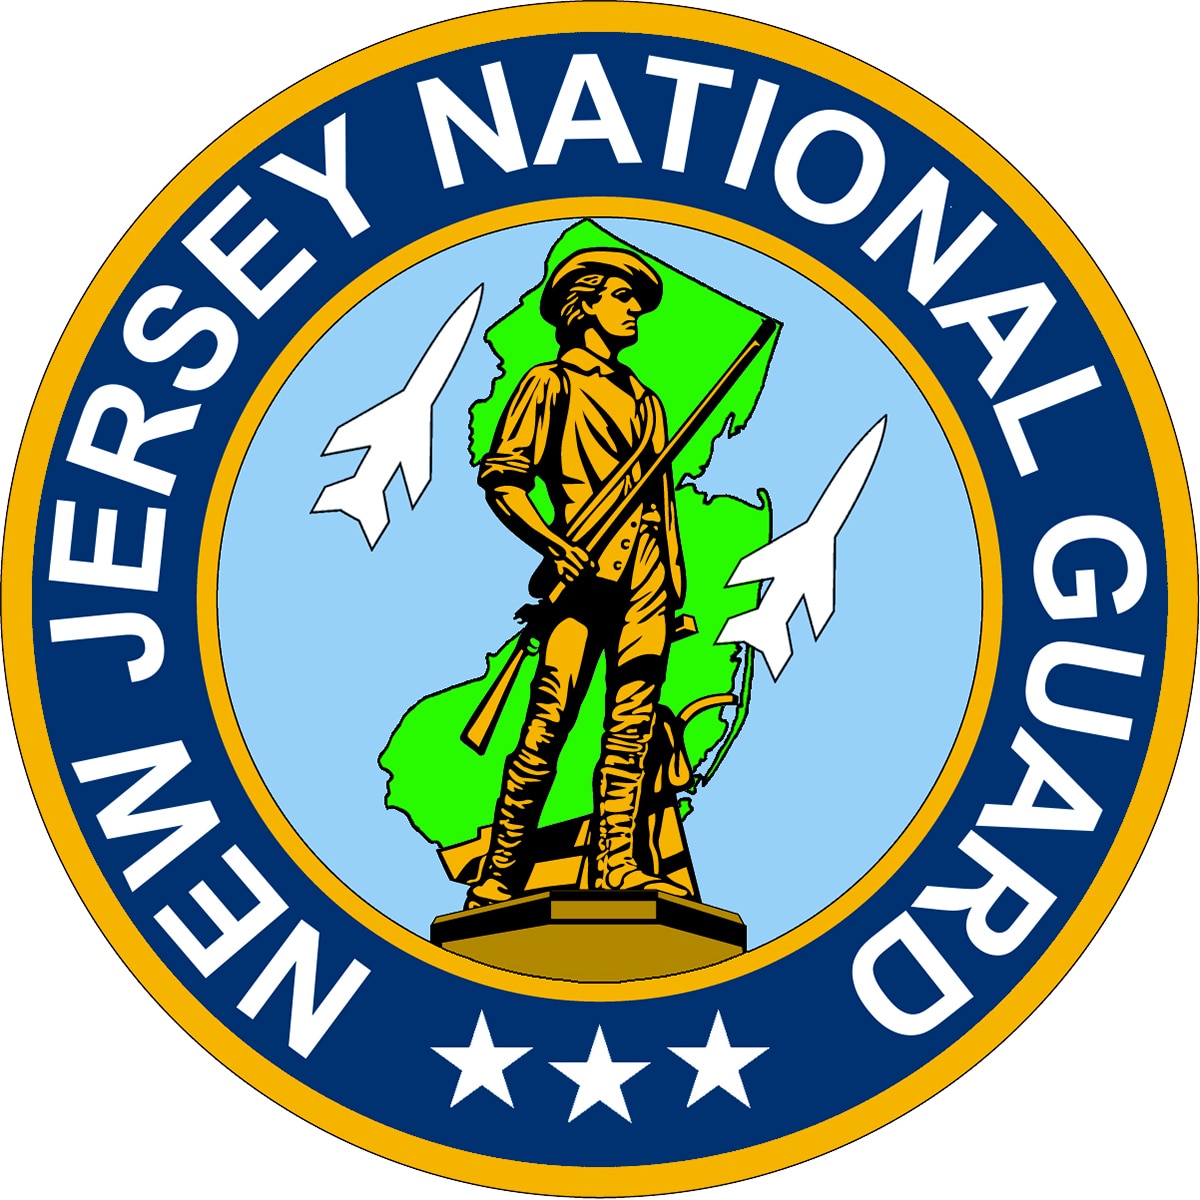 The New Jersey National Guard has been selected as the new state partner for the Republic of Cyprus, the third-largest island in the Eastern Mediterranean Sea. New Jersey is also partners under the State Partnership Program with the Republic of Albania.